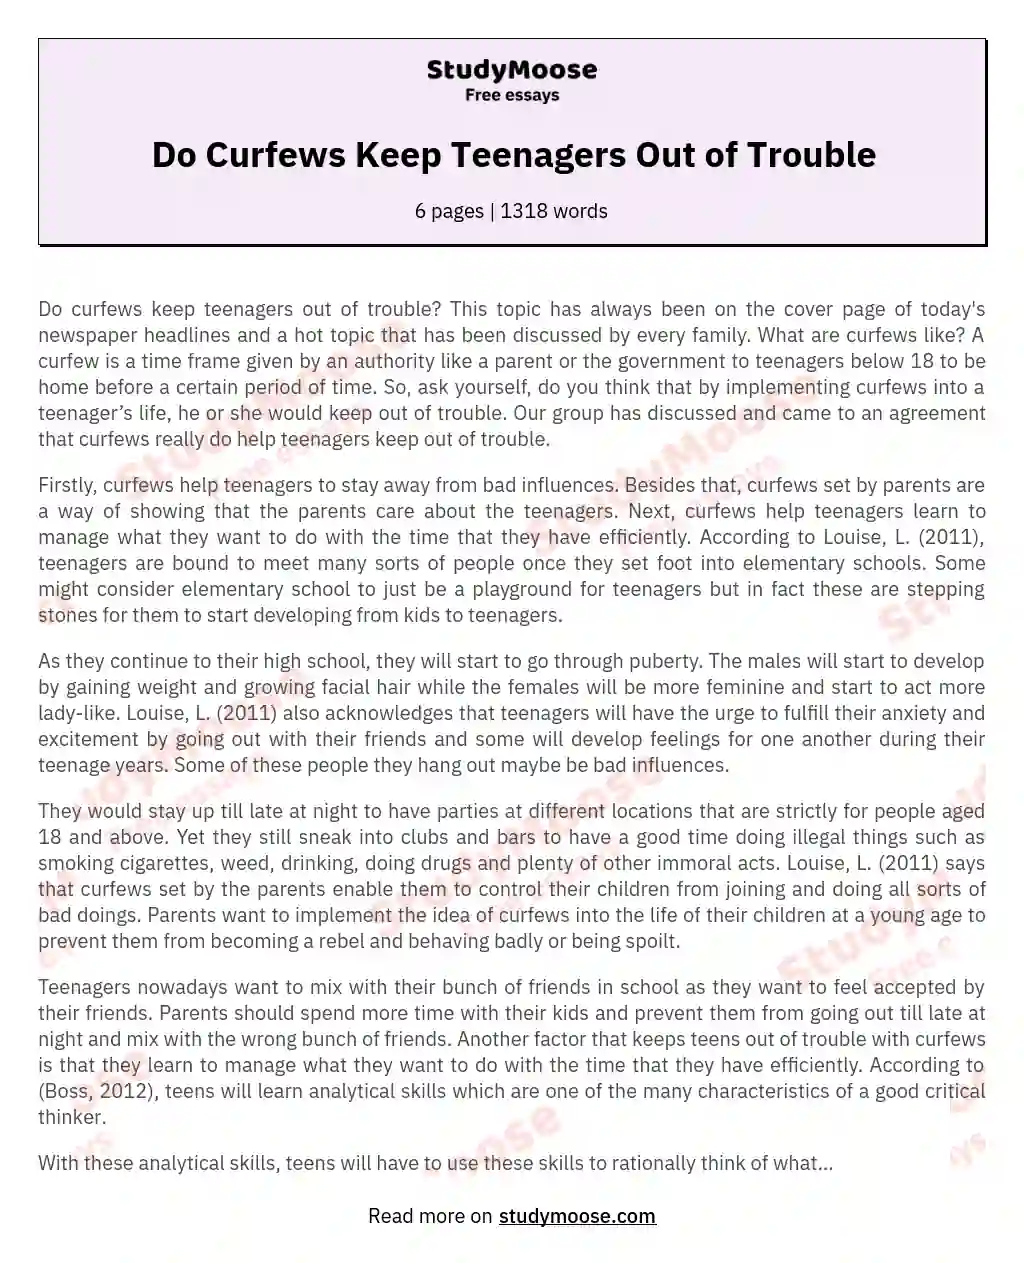 Do Curfews Keep Teenagers Out of Trouble essay